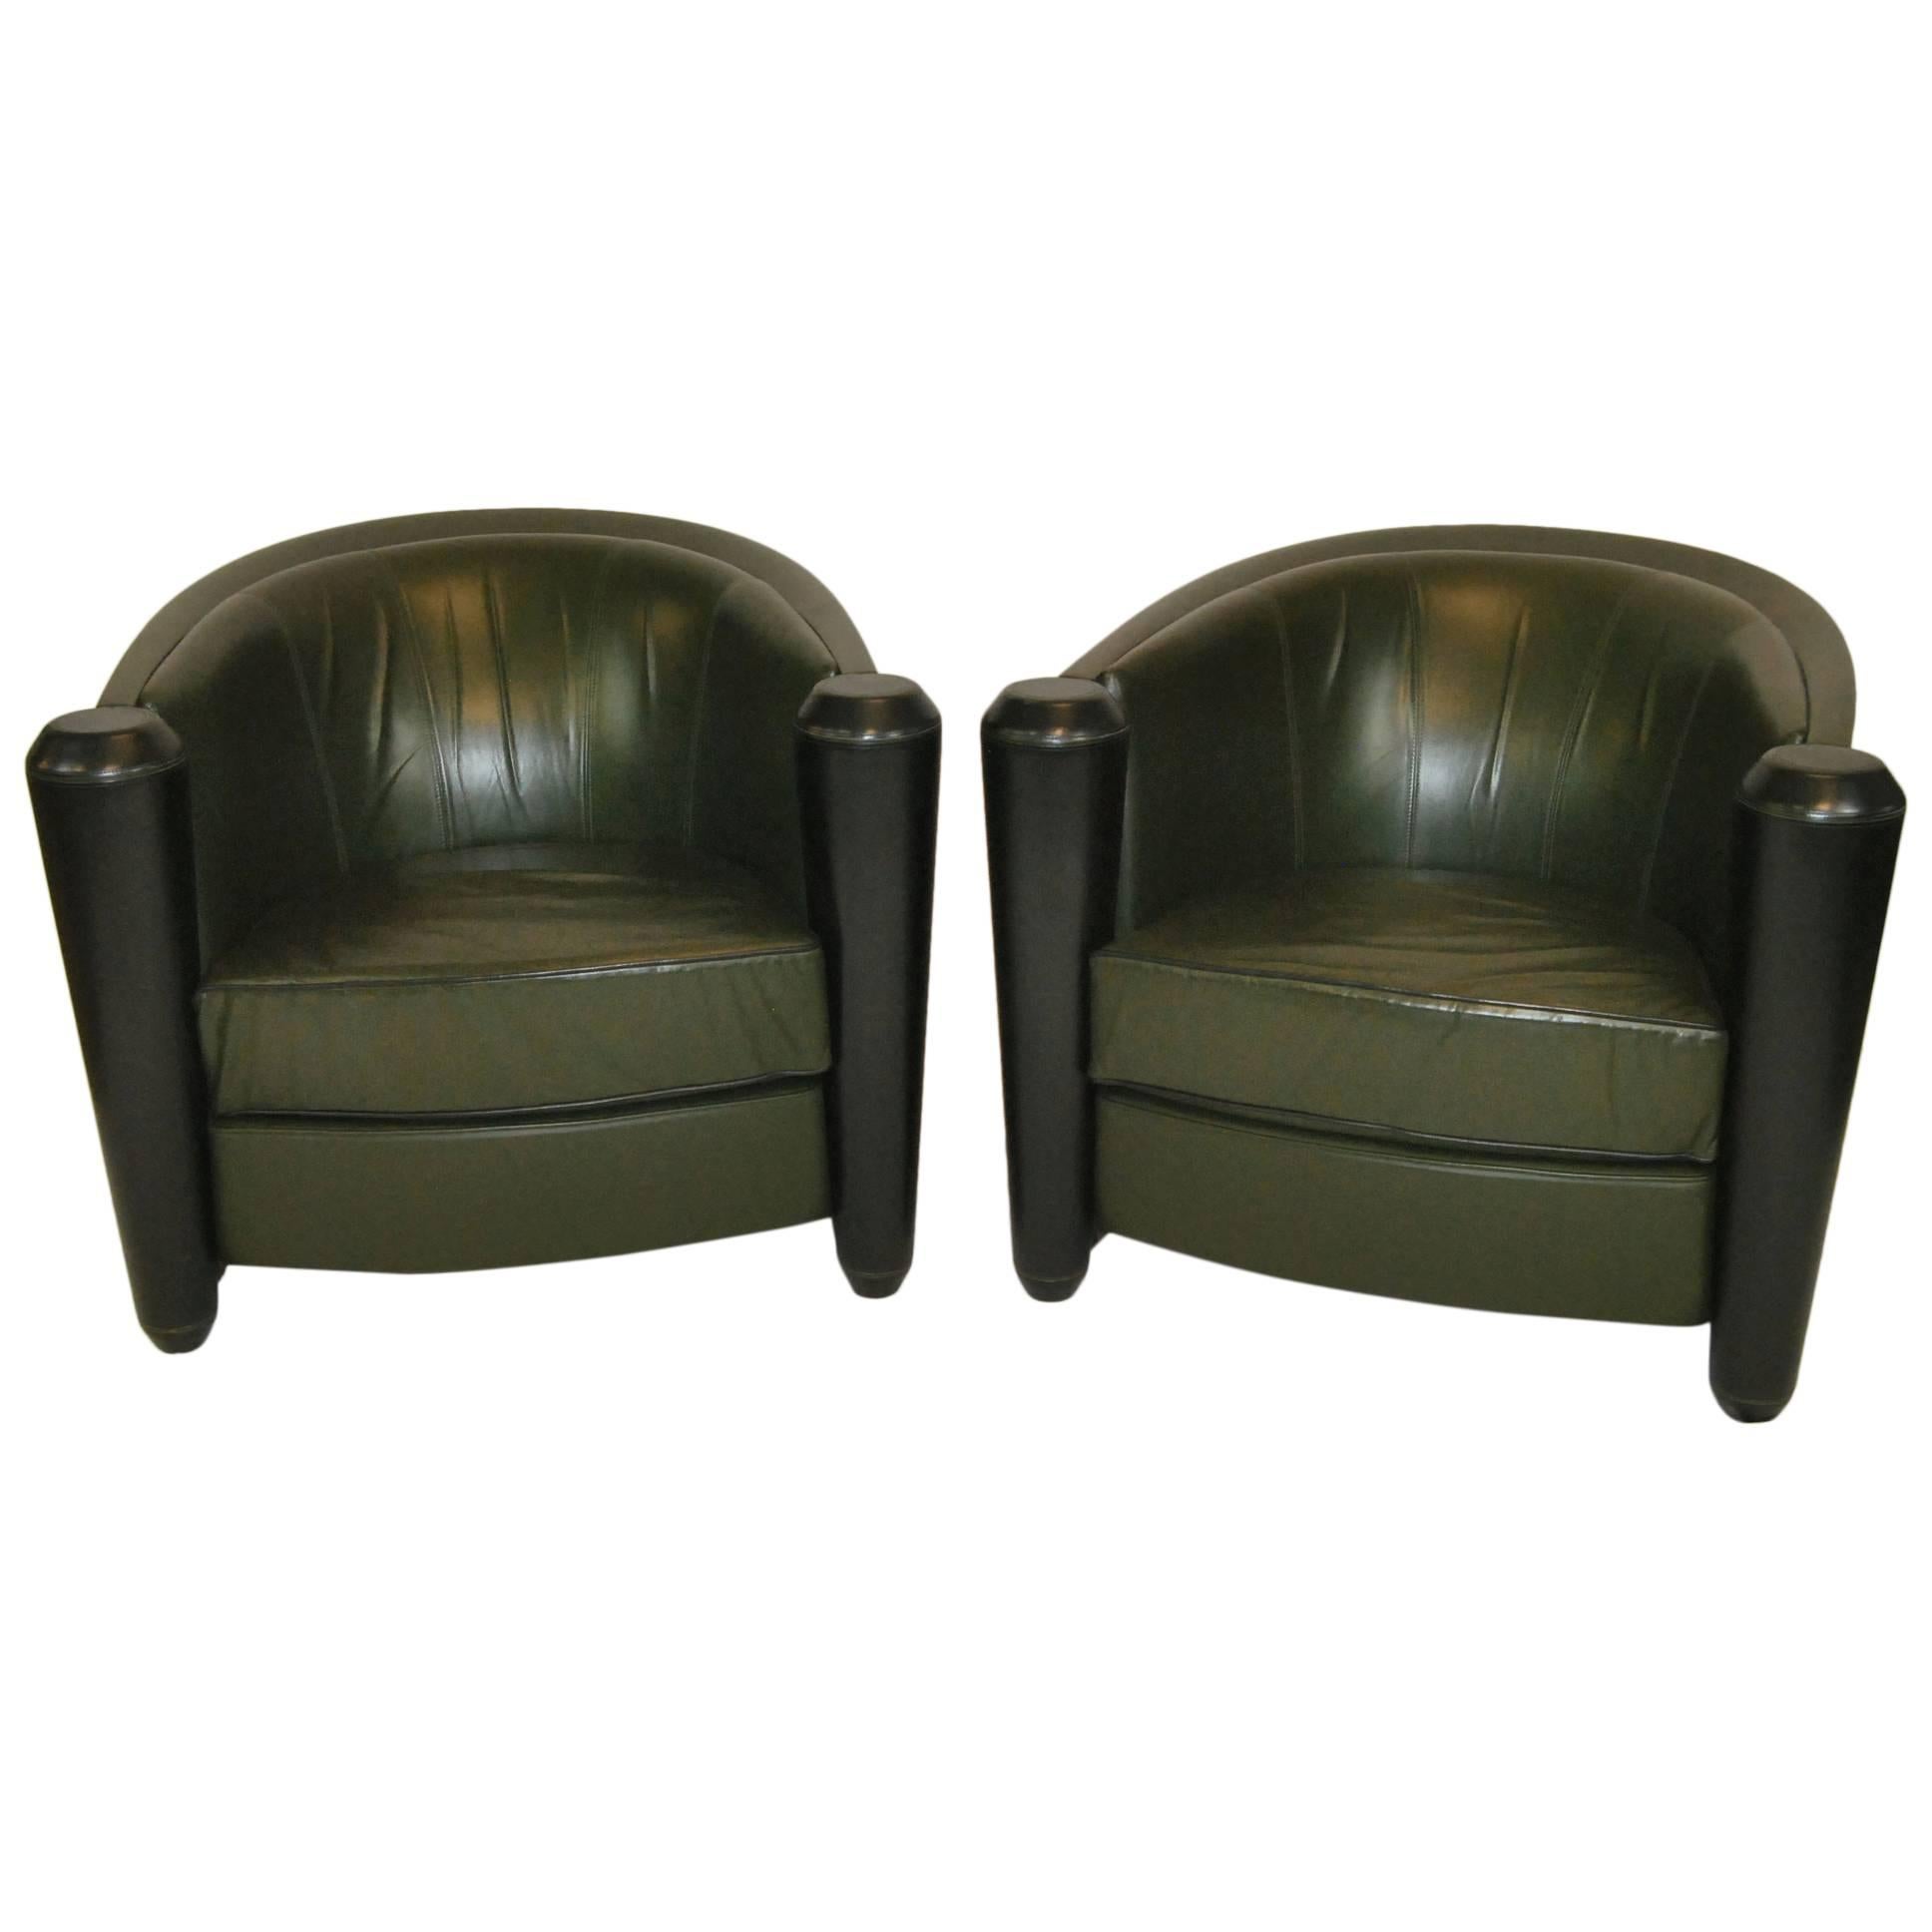 Pair of Italian Pace Collection Leather Club Chairs by Adam Tihany